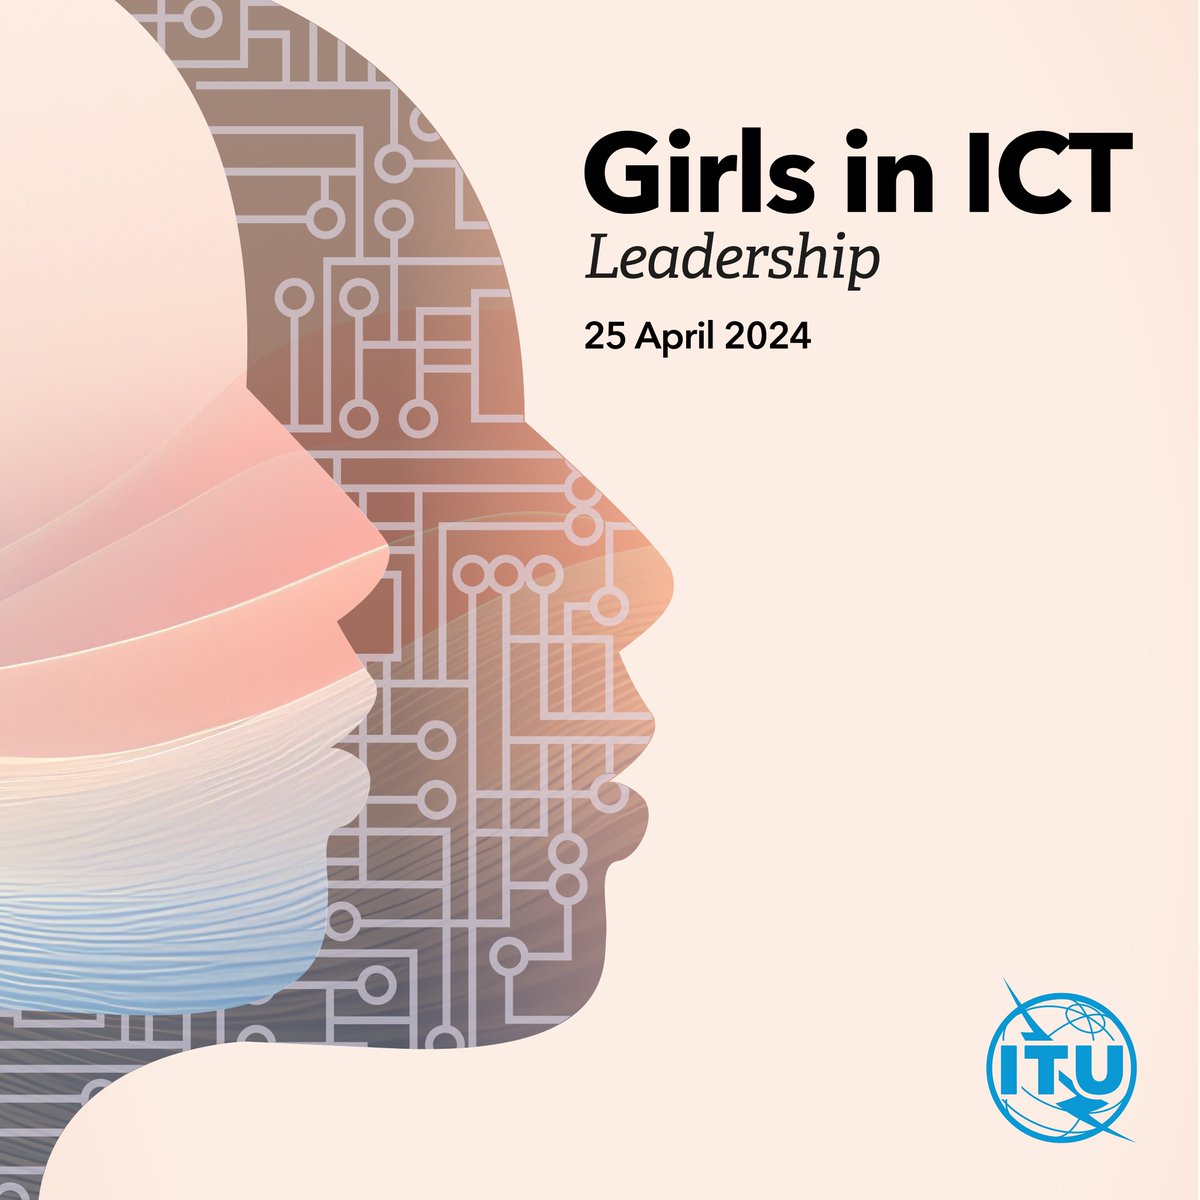 On #GirlsinICT day, let's remember that lack of digital skills is a major obstacle to achieving digital gender equality. With technology playing a crucial role in all kinds of careers, promoting #leadership & exciting career paths in #ICT is critical.